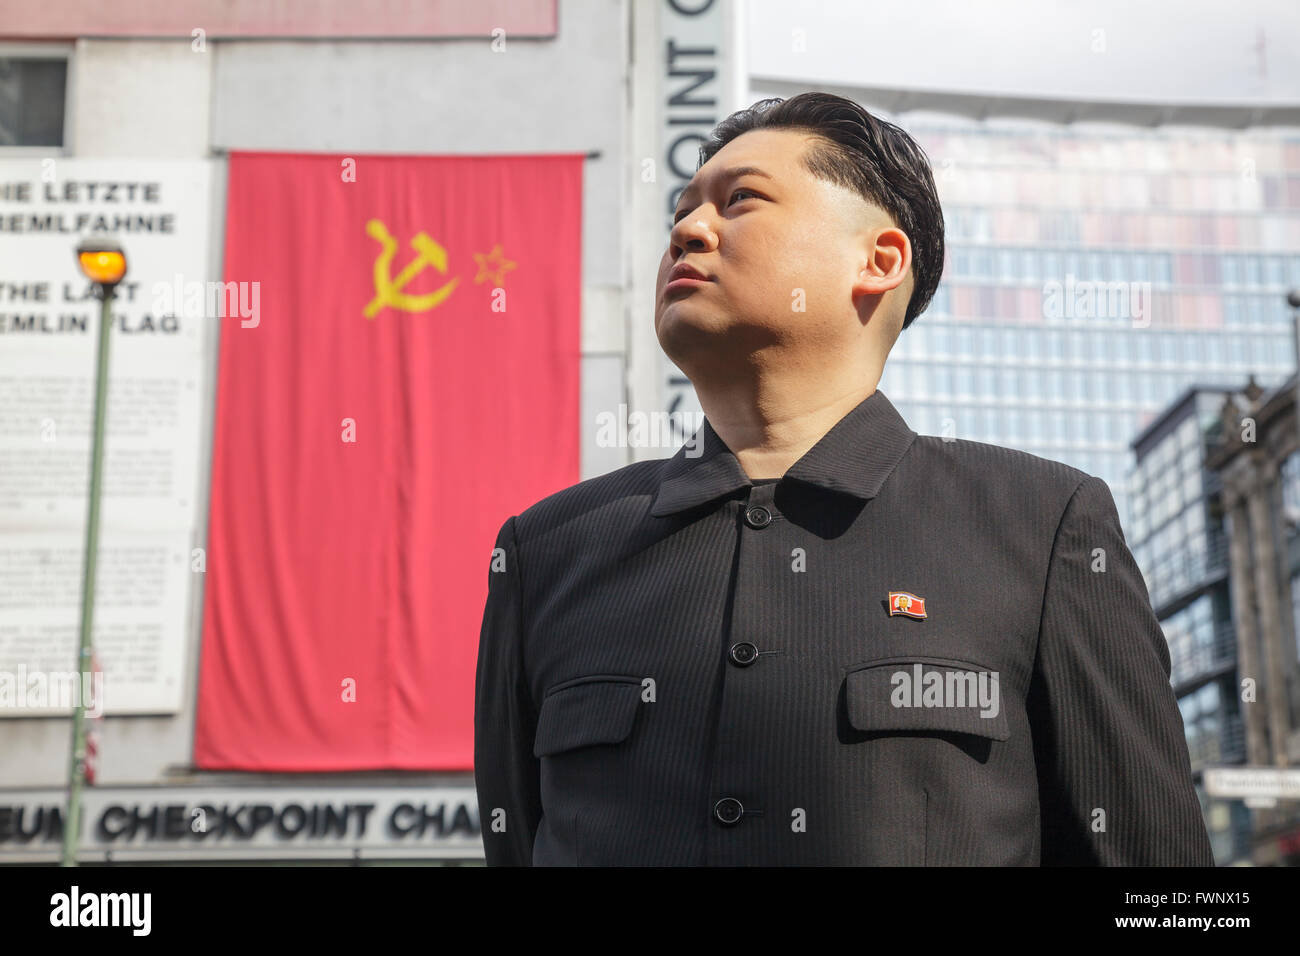 Berlin, Germany. 6th April 2016. Kim Jong Un impersonator, Howard X from Hong Kong, visited Berlin, touring the major tourist sites to the surprise of tourists and locals. Howard was visiting Germany to film an advertisement for the popular German TV show 'Schlag den Star' with commedian Elton.  Here, at Haus am Checkpoint Charlie Museum with the Last Kremlin Flag. Model release available for Howard X. Credit:  Julie Woodhouse/Alamy Live News Stock Photo